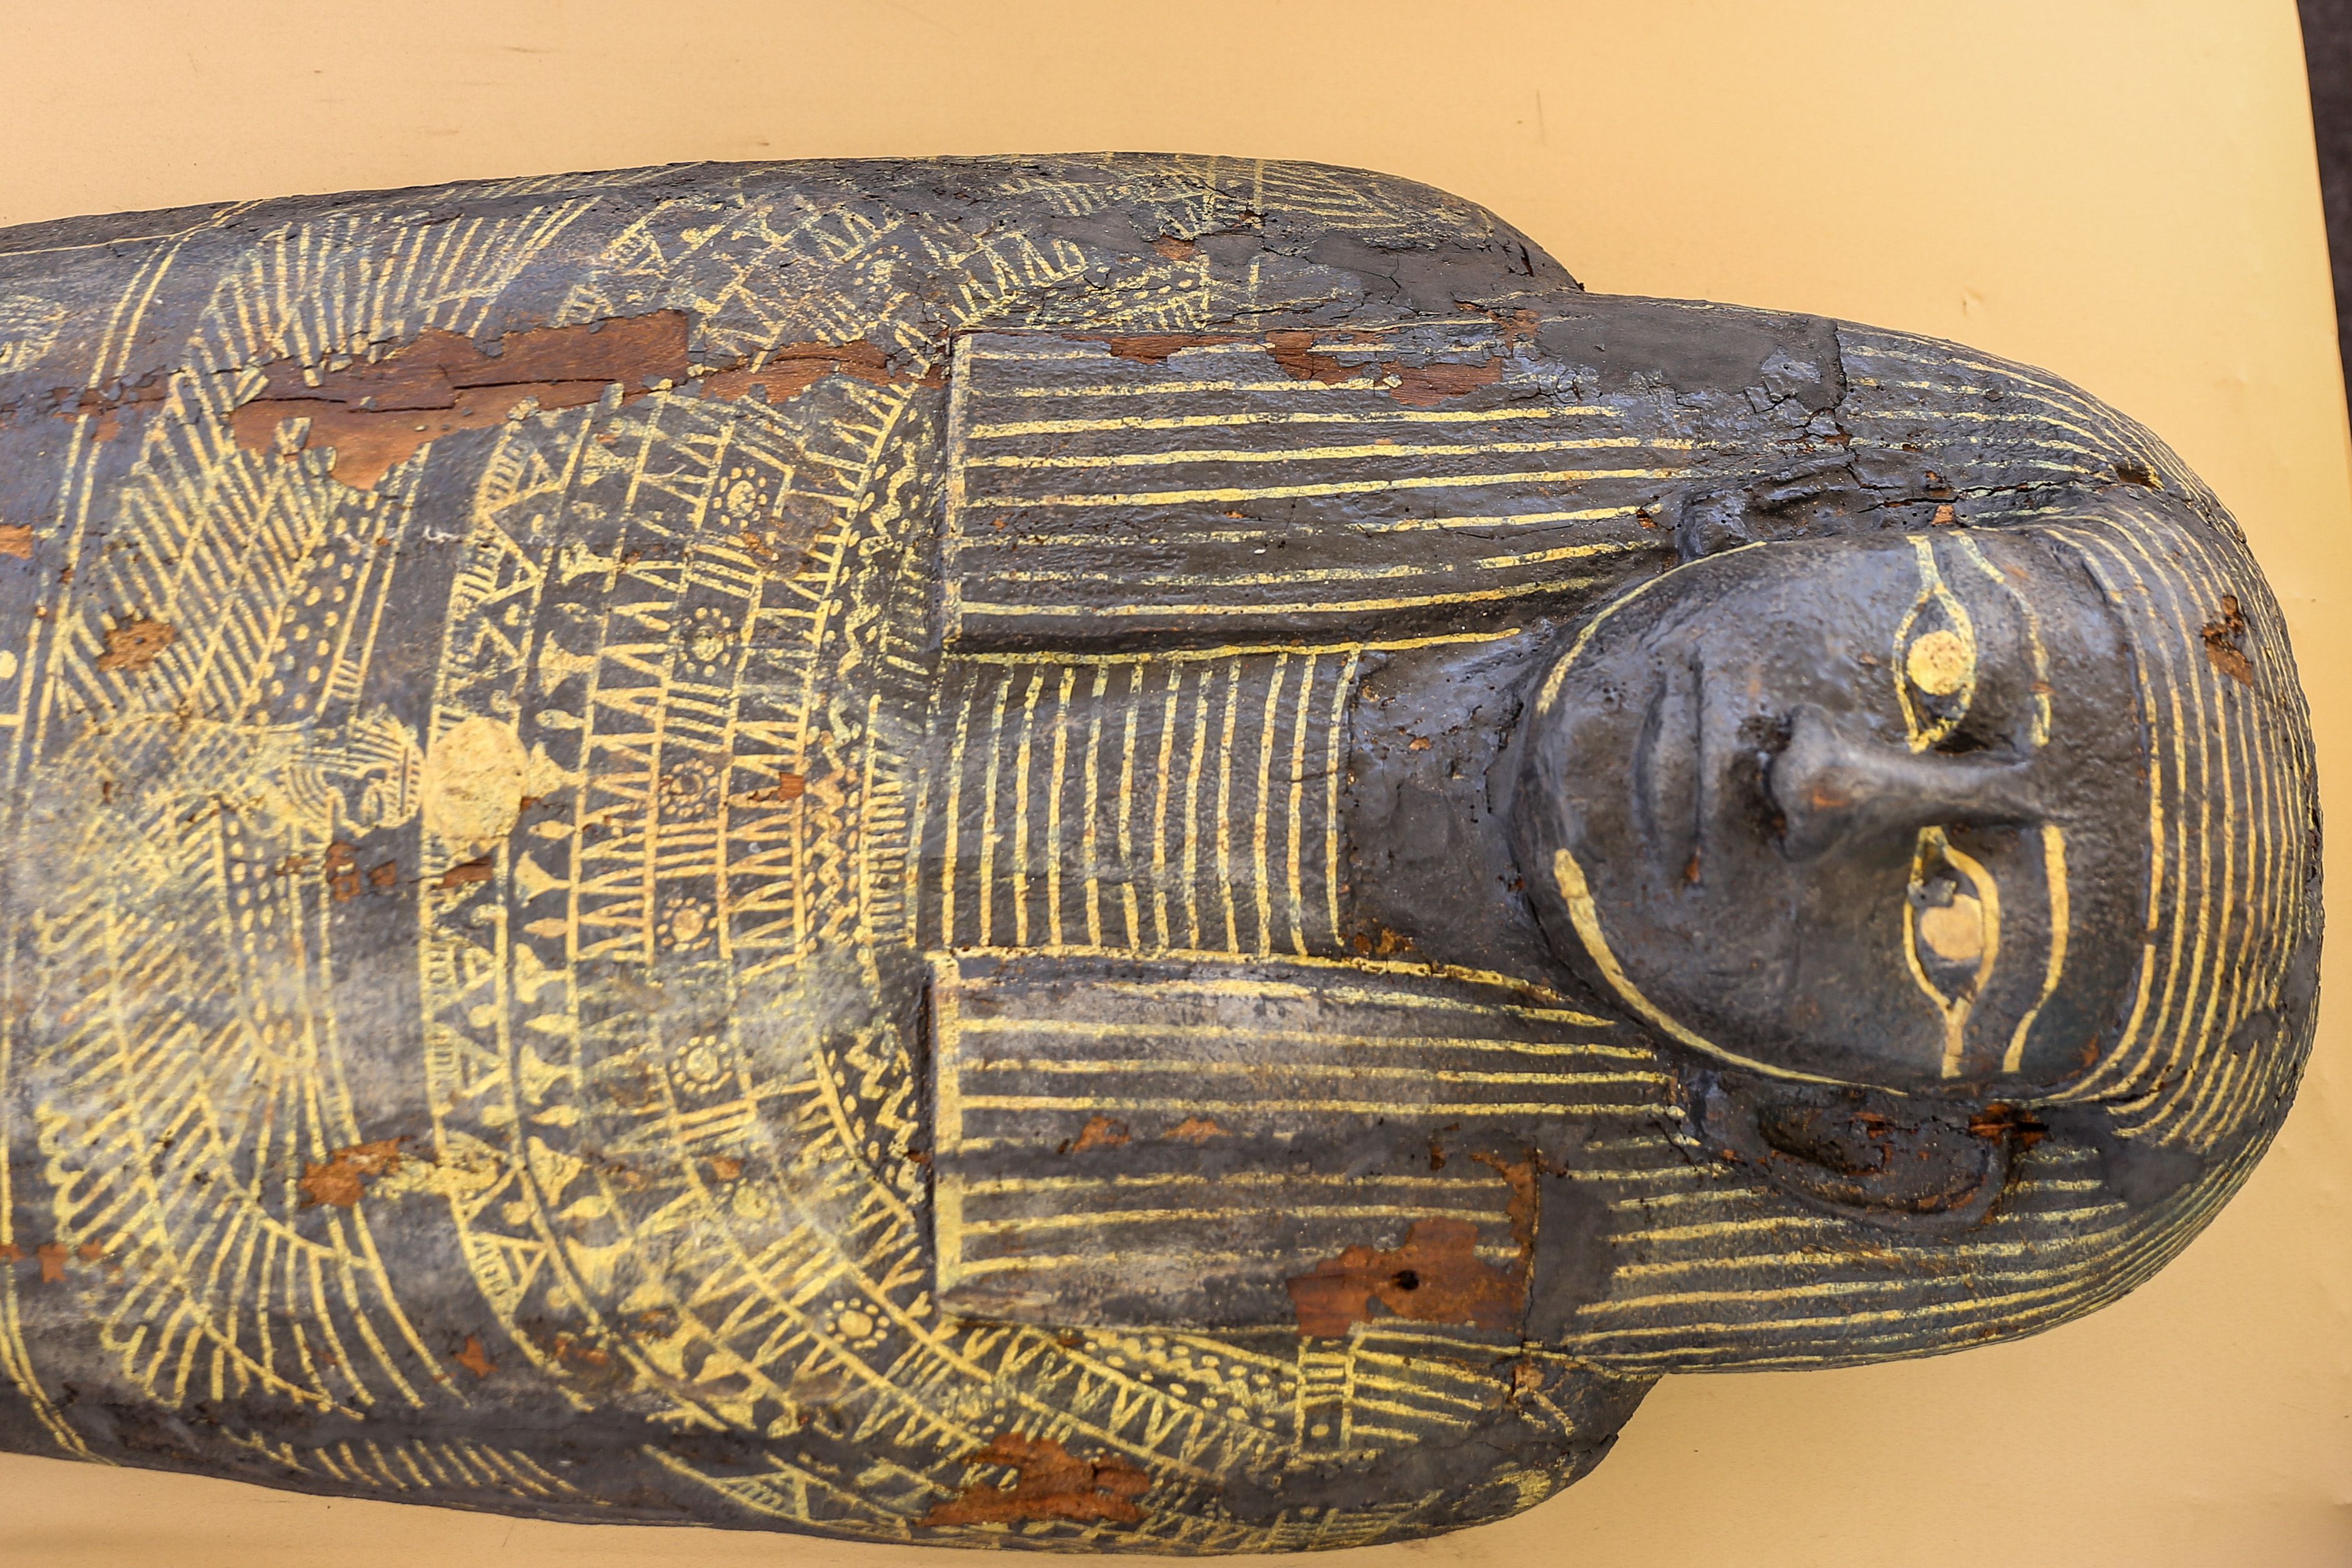 The discovery of mummy coffins dating back more than 2,500 years, which were revealed in the ancient Saqqara ring, during an official conference on May 30, 2022 Giza Egypt.